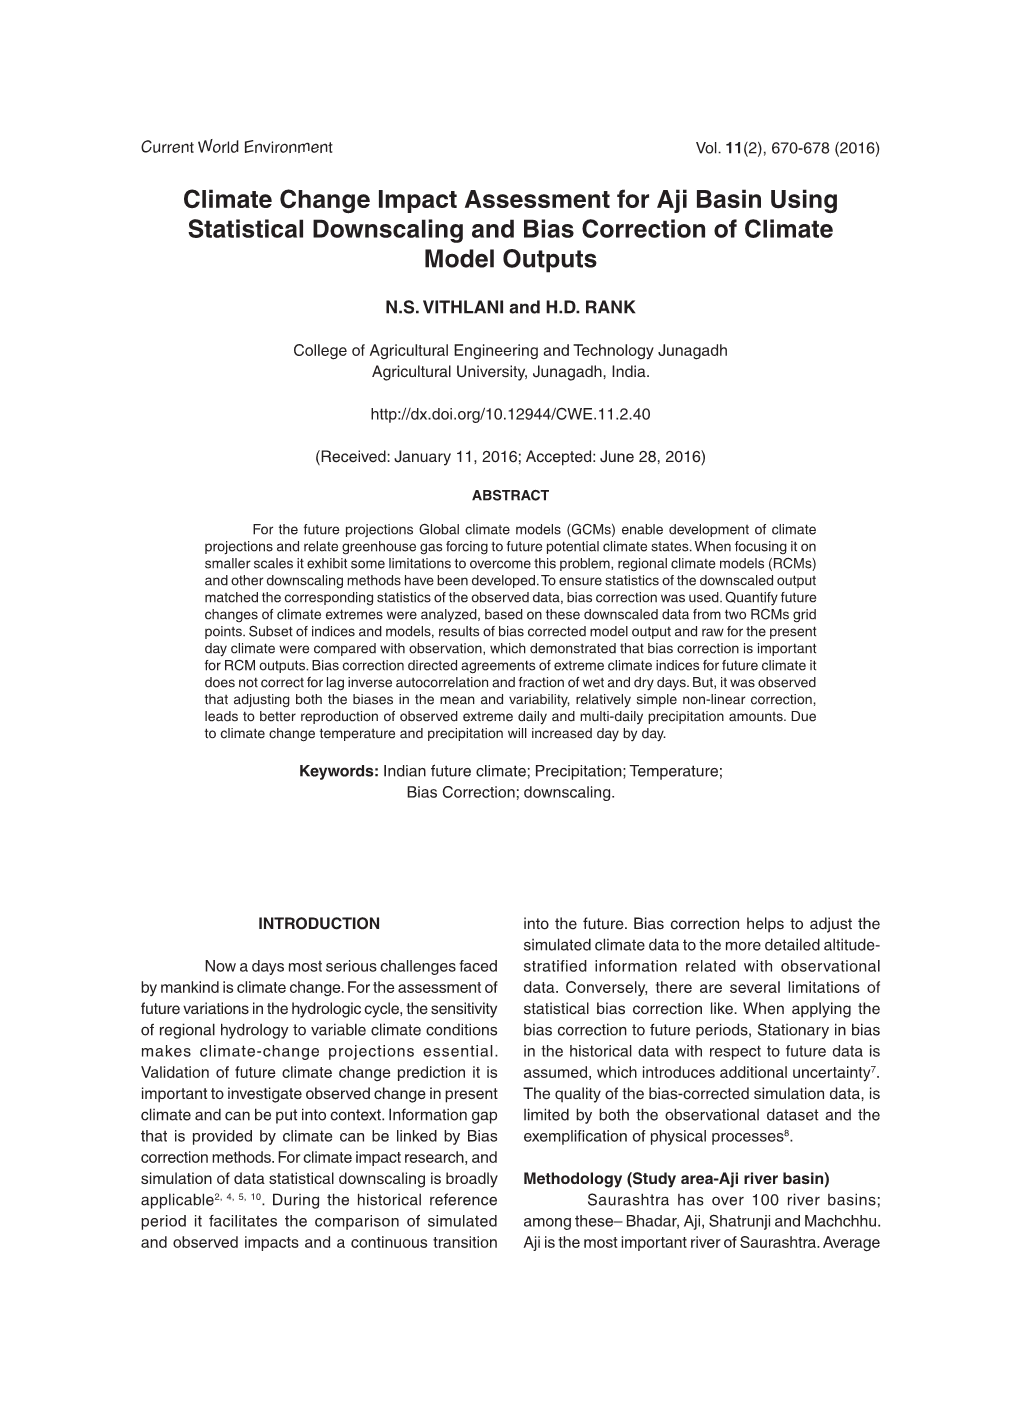 Climate Change Impact Assessment for Aji Basin Using Statistical Downscaling and Bias Correction of Climate Model Outputs